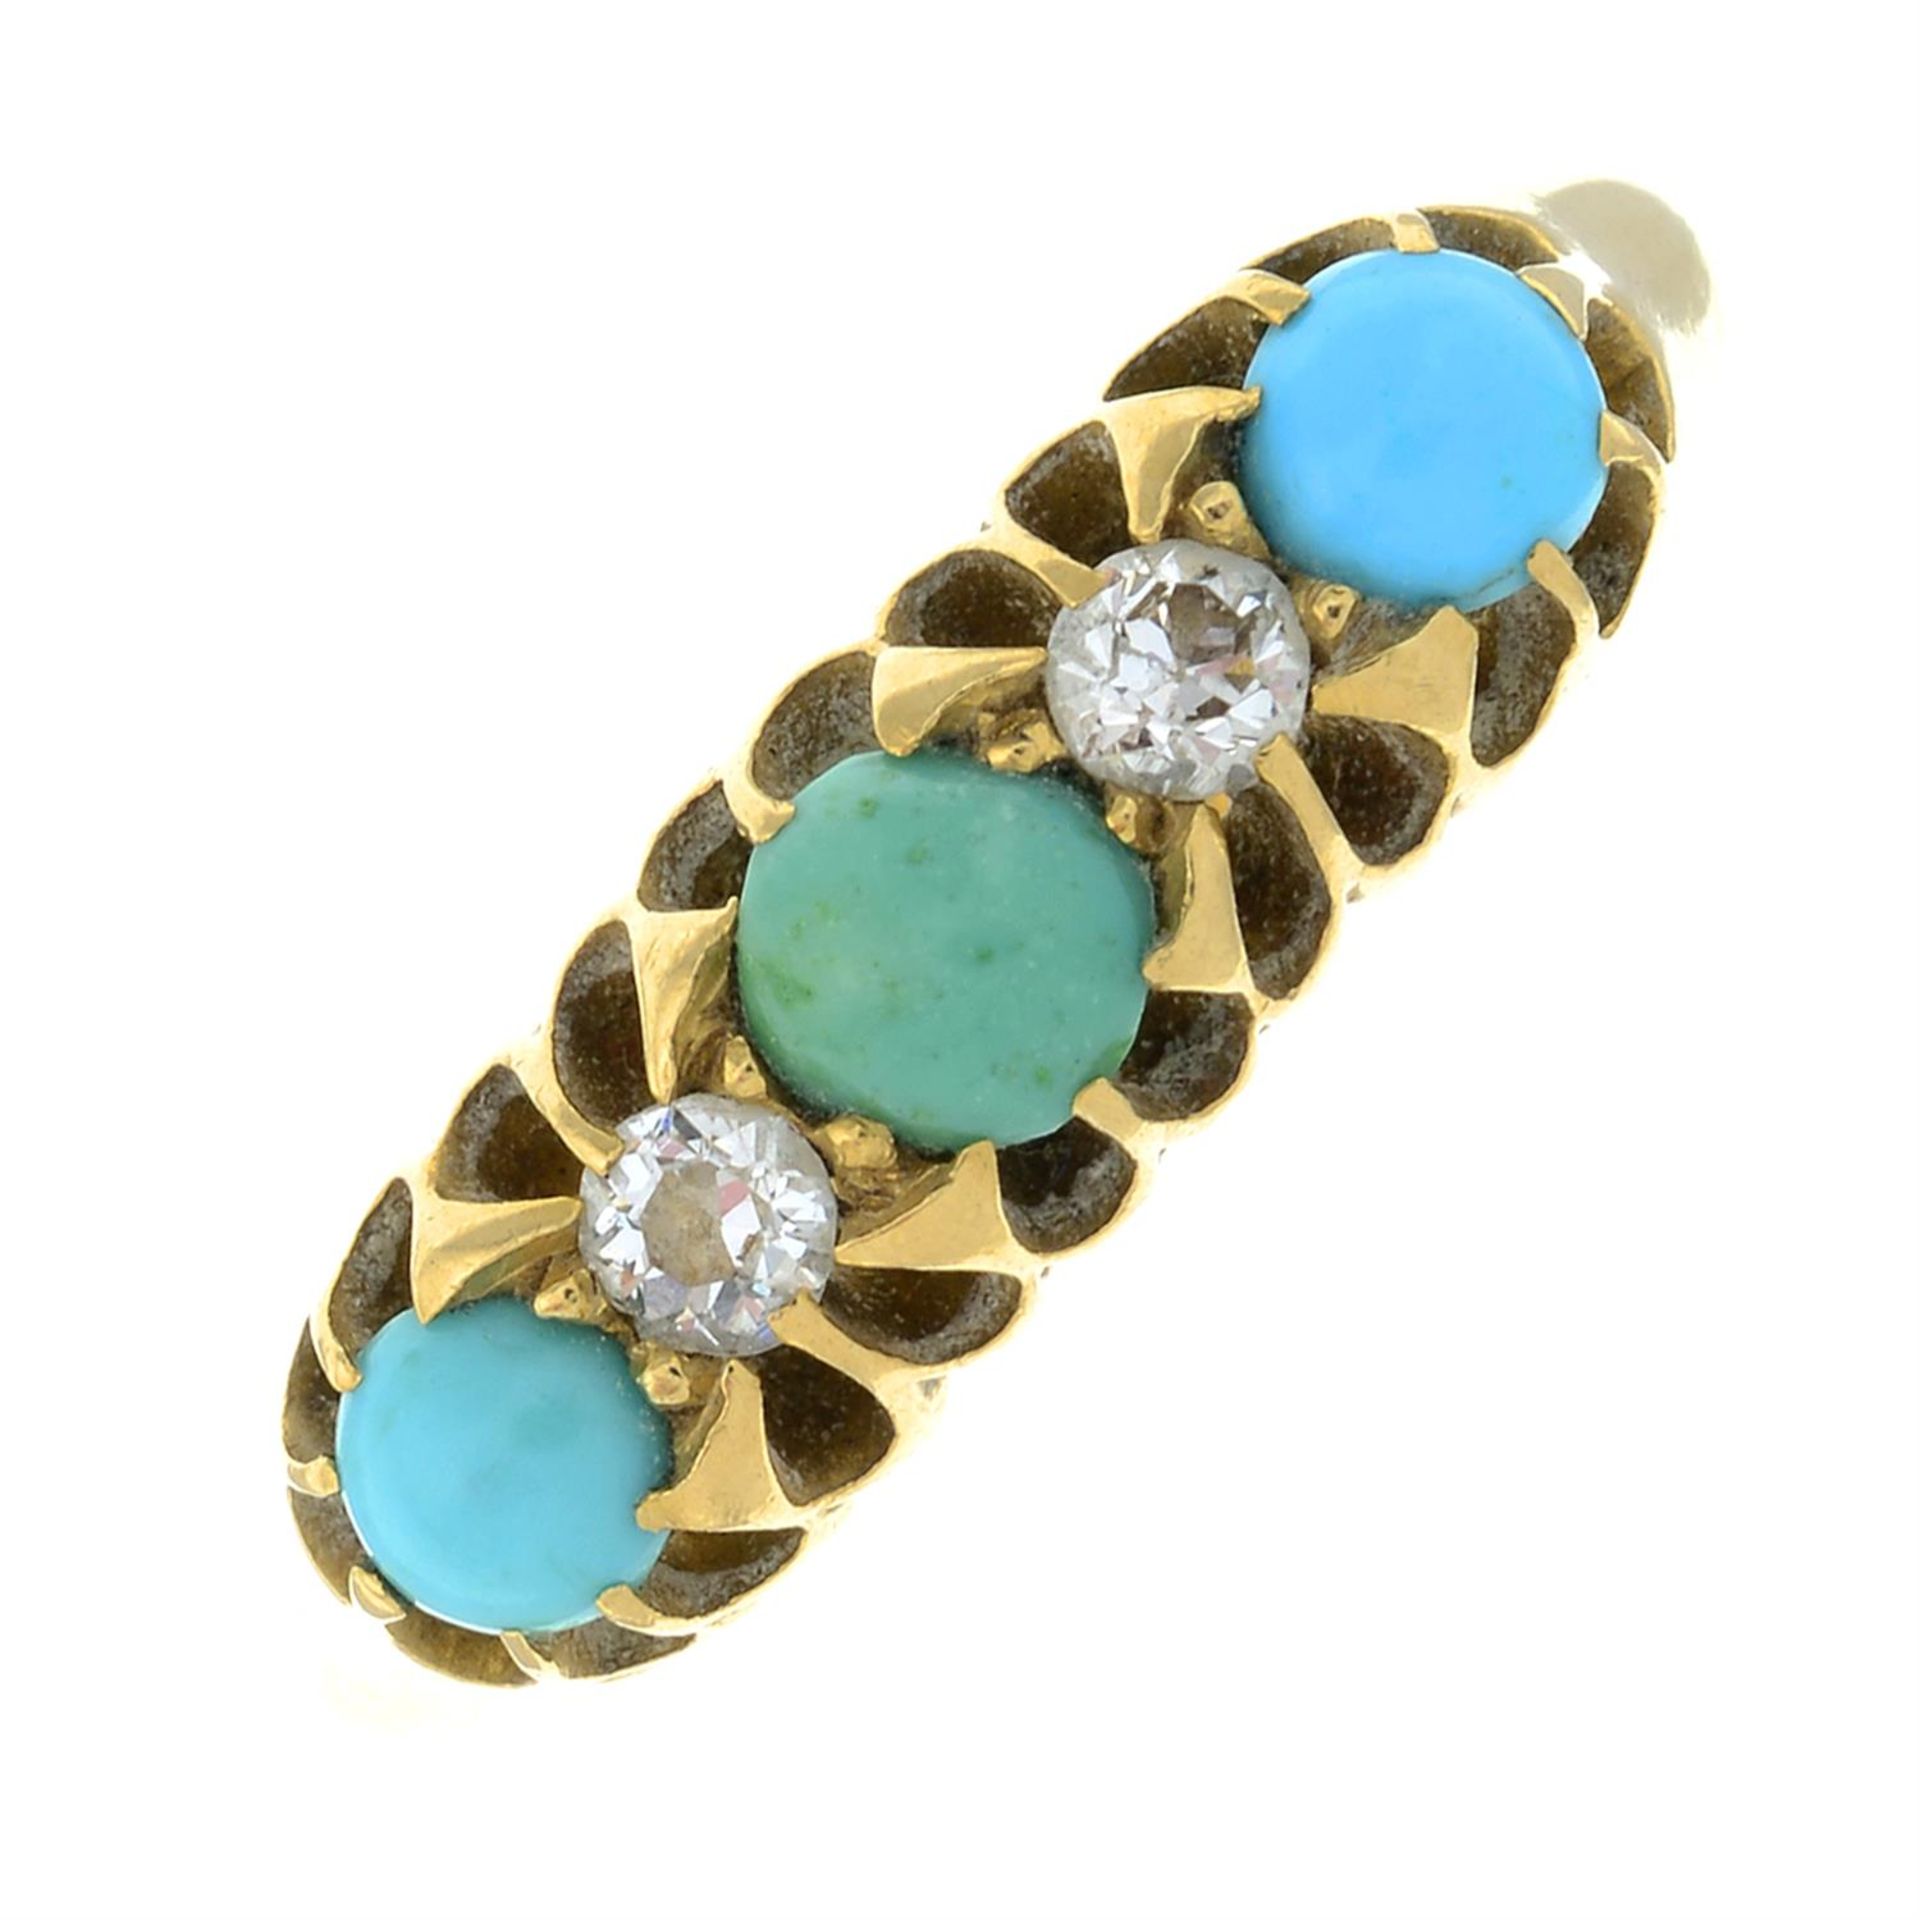 Late Victorian turquoise & diamond ring.